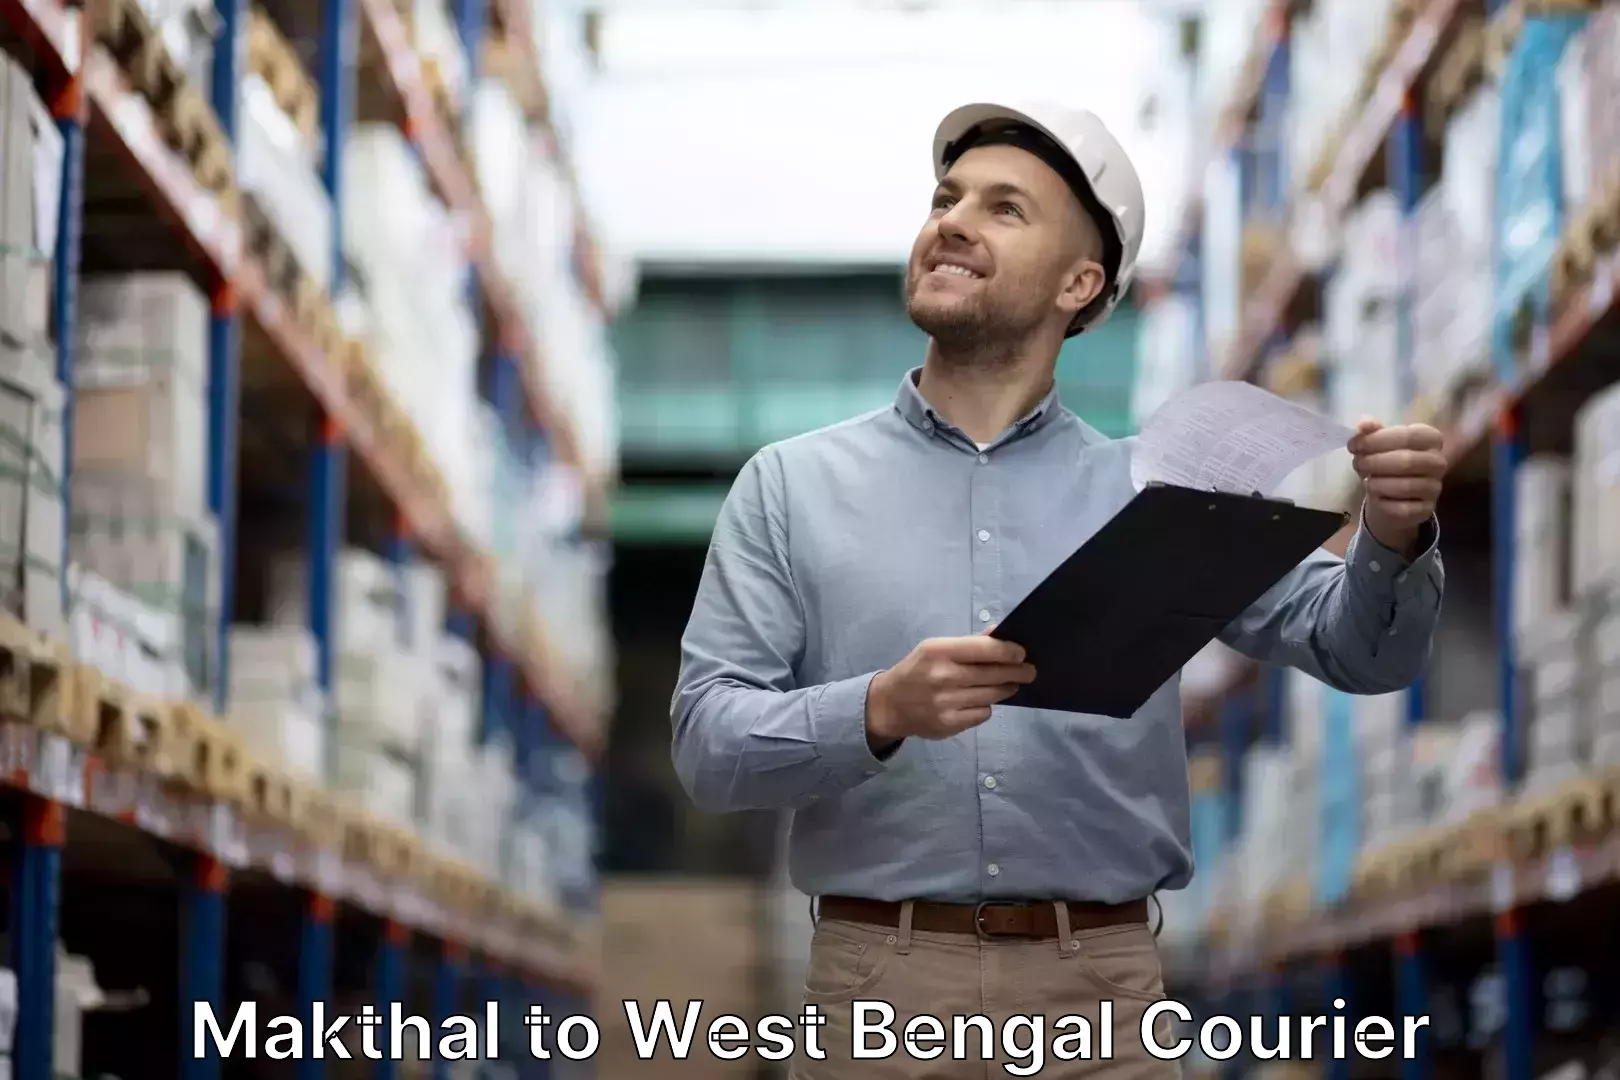 Luggage shipment specialists Makthal to West Bengal